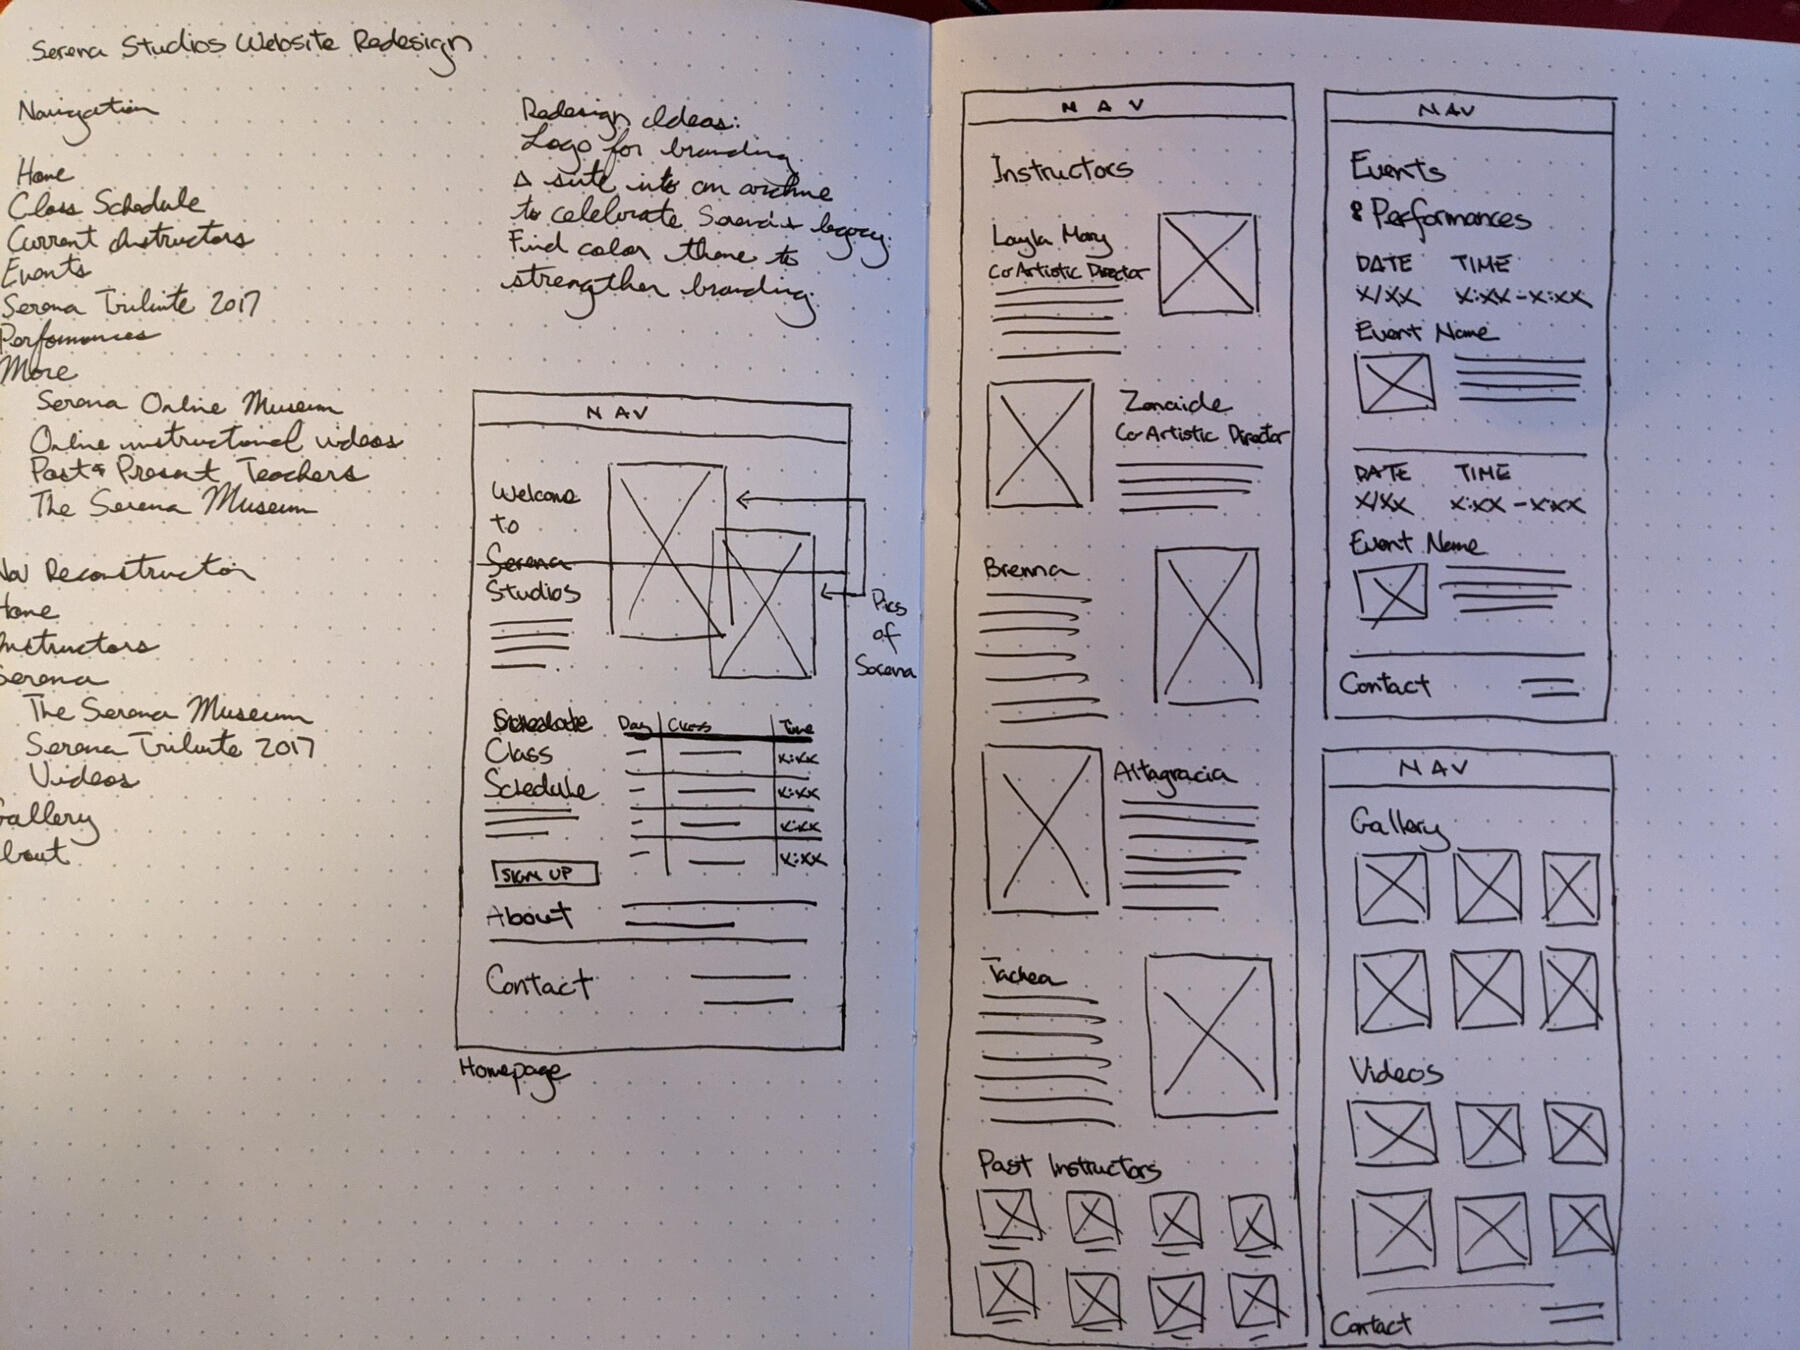 Wireframe illustrations and notes about how the site should look.